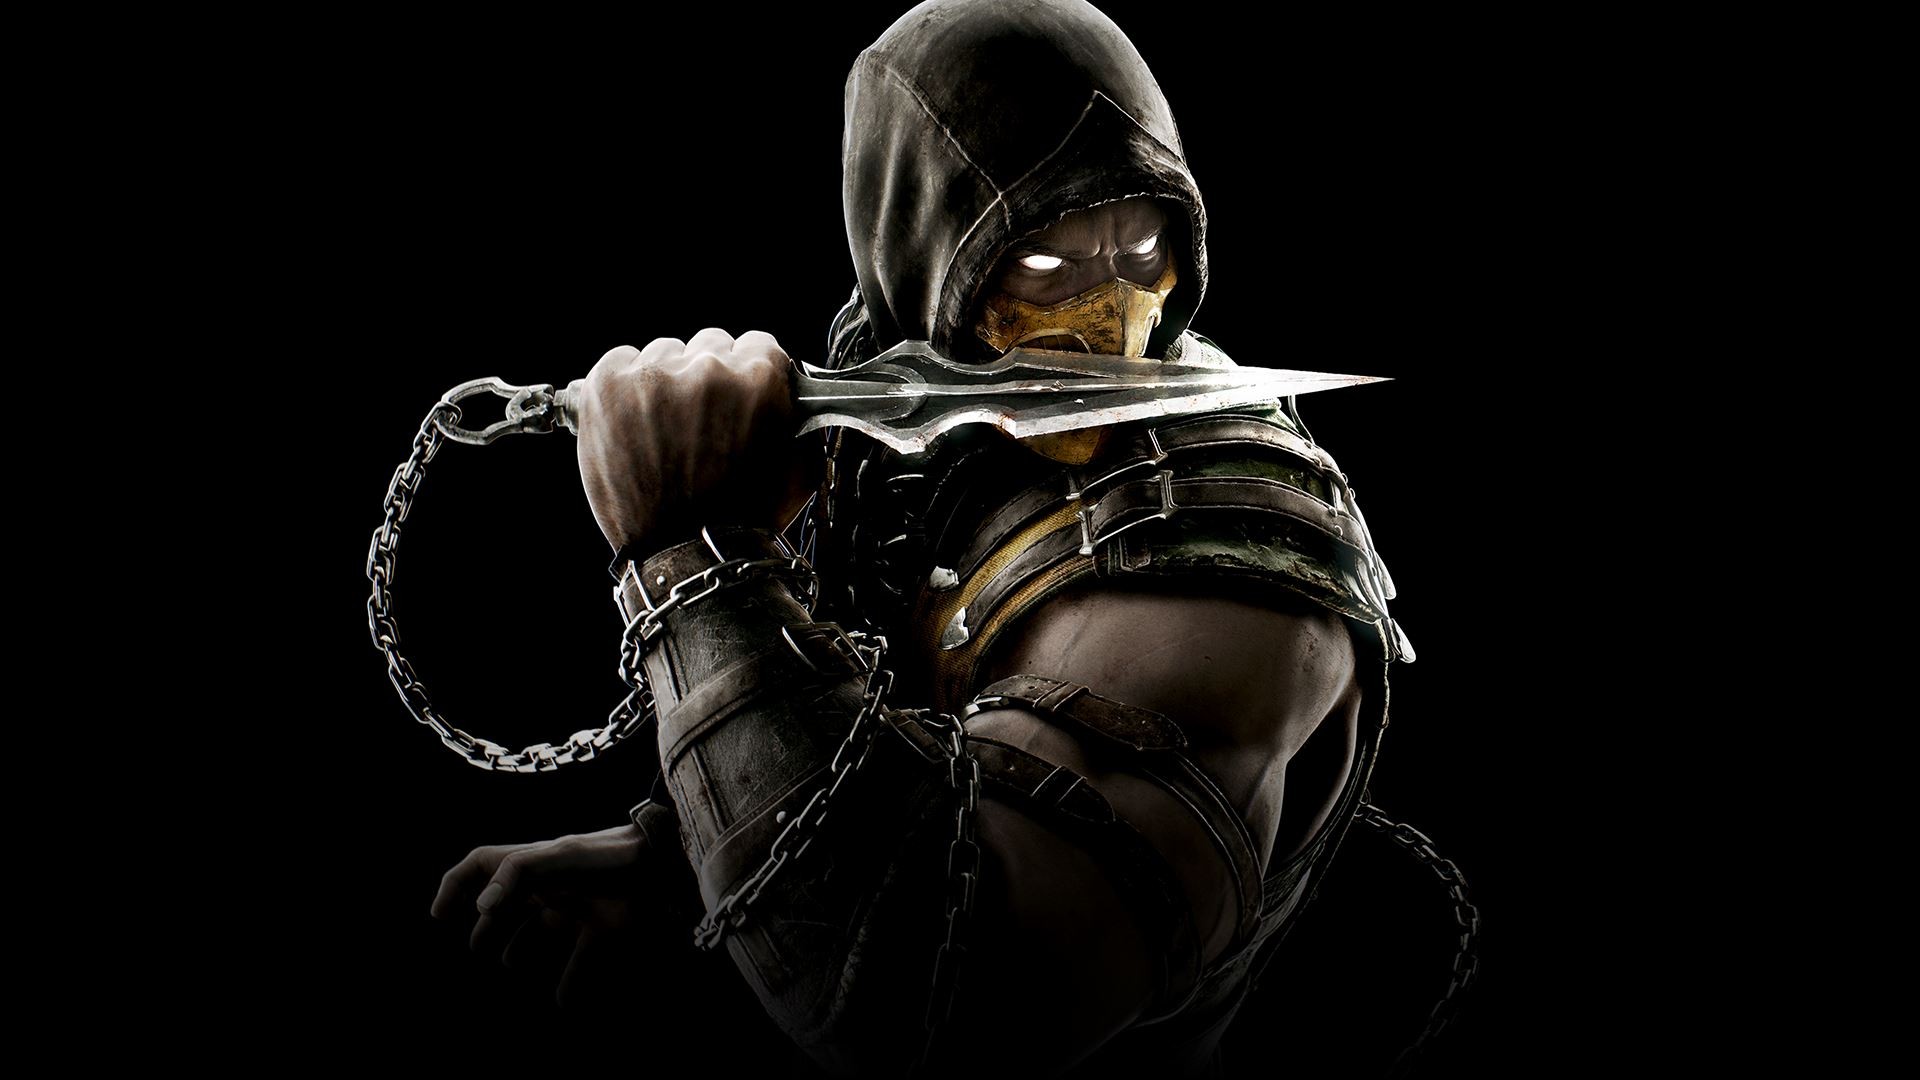 General 1920x1080 Mortal Kombat mortal kombat 10 Mortal Kombat X video game characters video game warriors simple background video games black background Scorpion (Mortal Kombat) glowing eyes weapon hoods mask